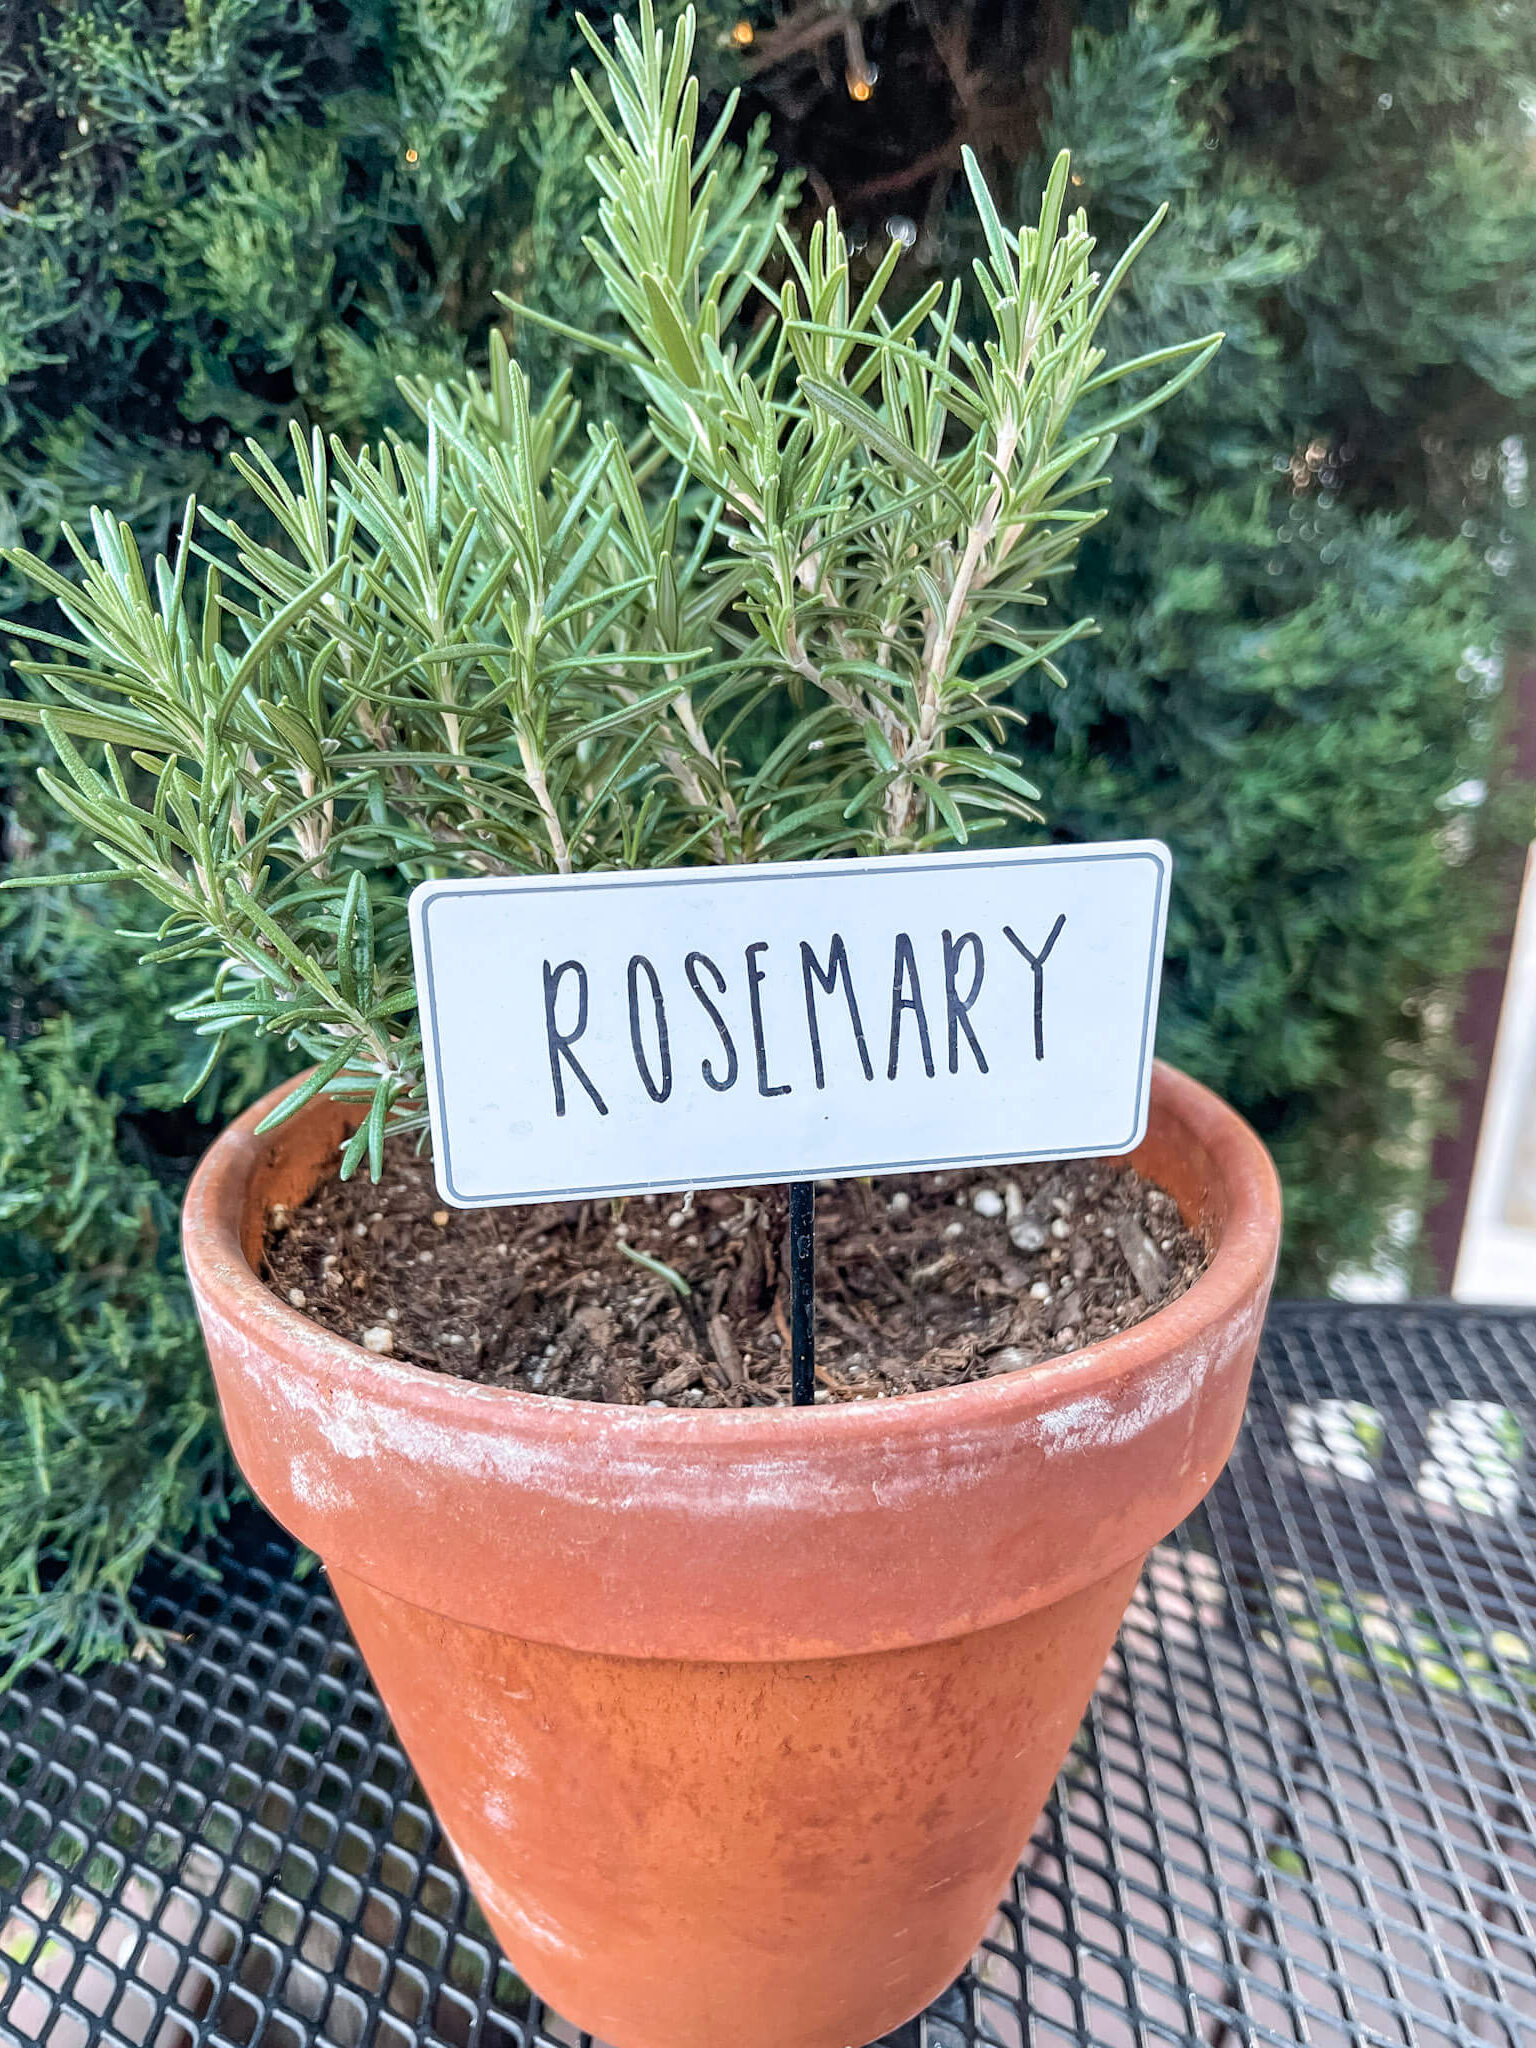 Planted rosemary at Wild Thyme Cafe